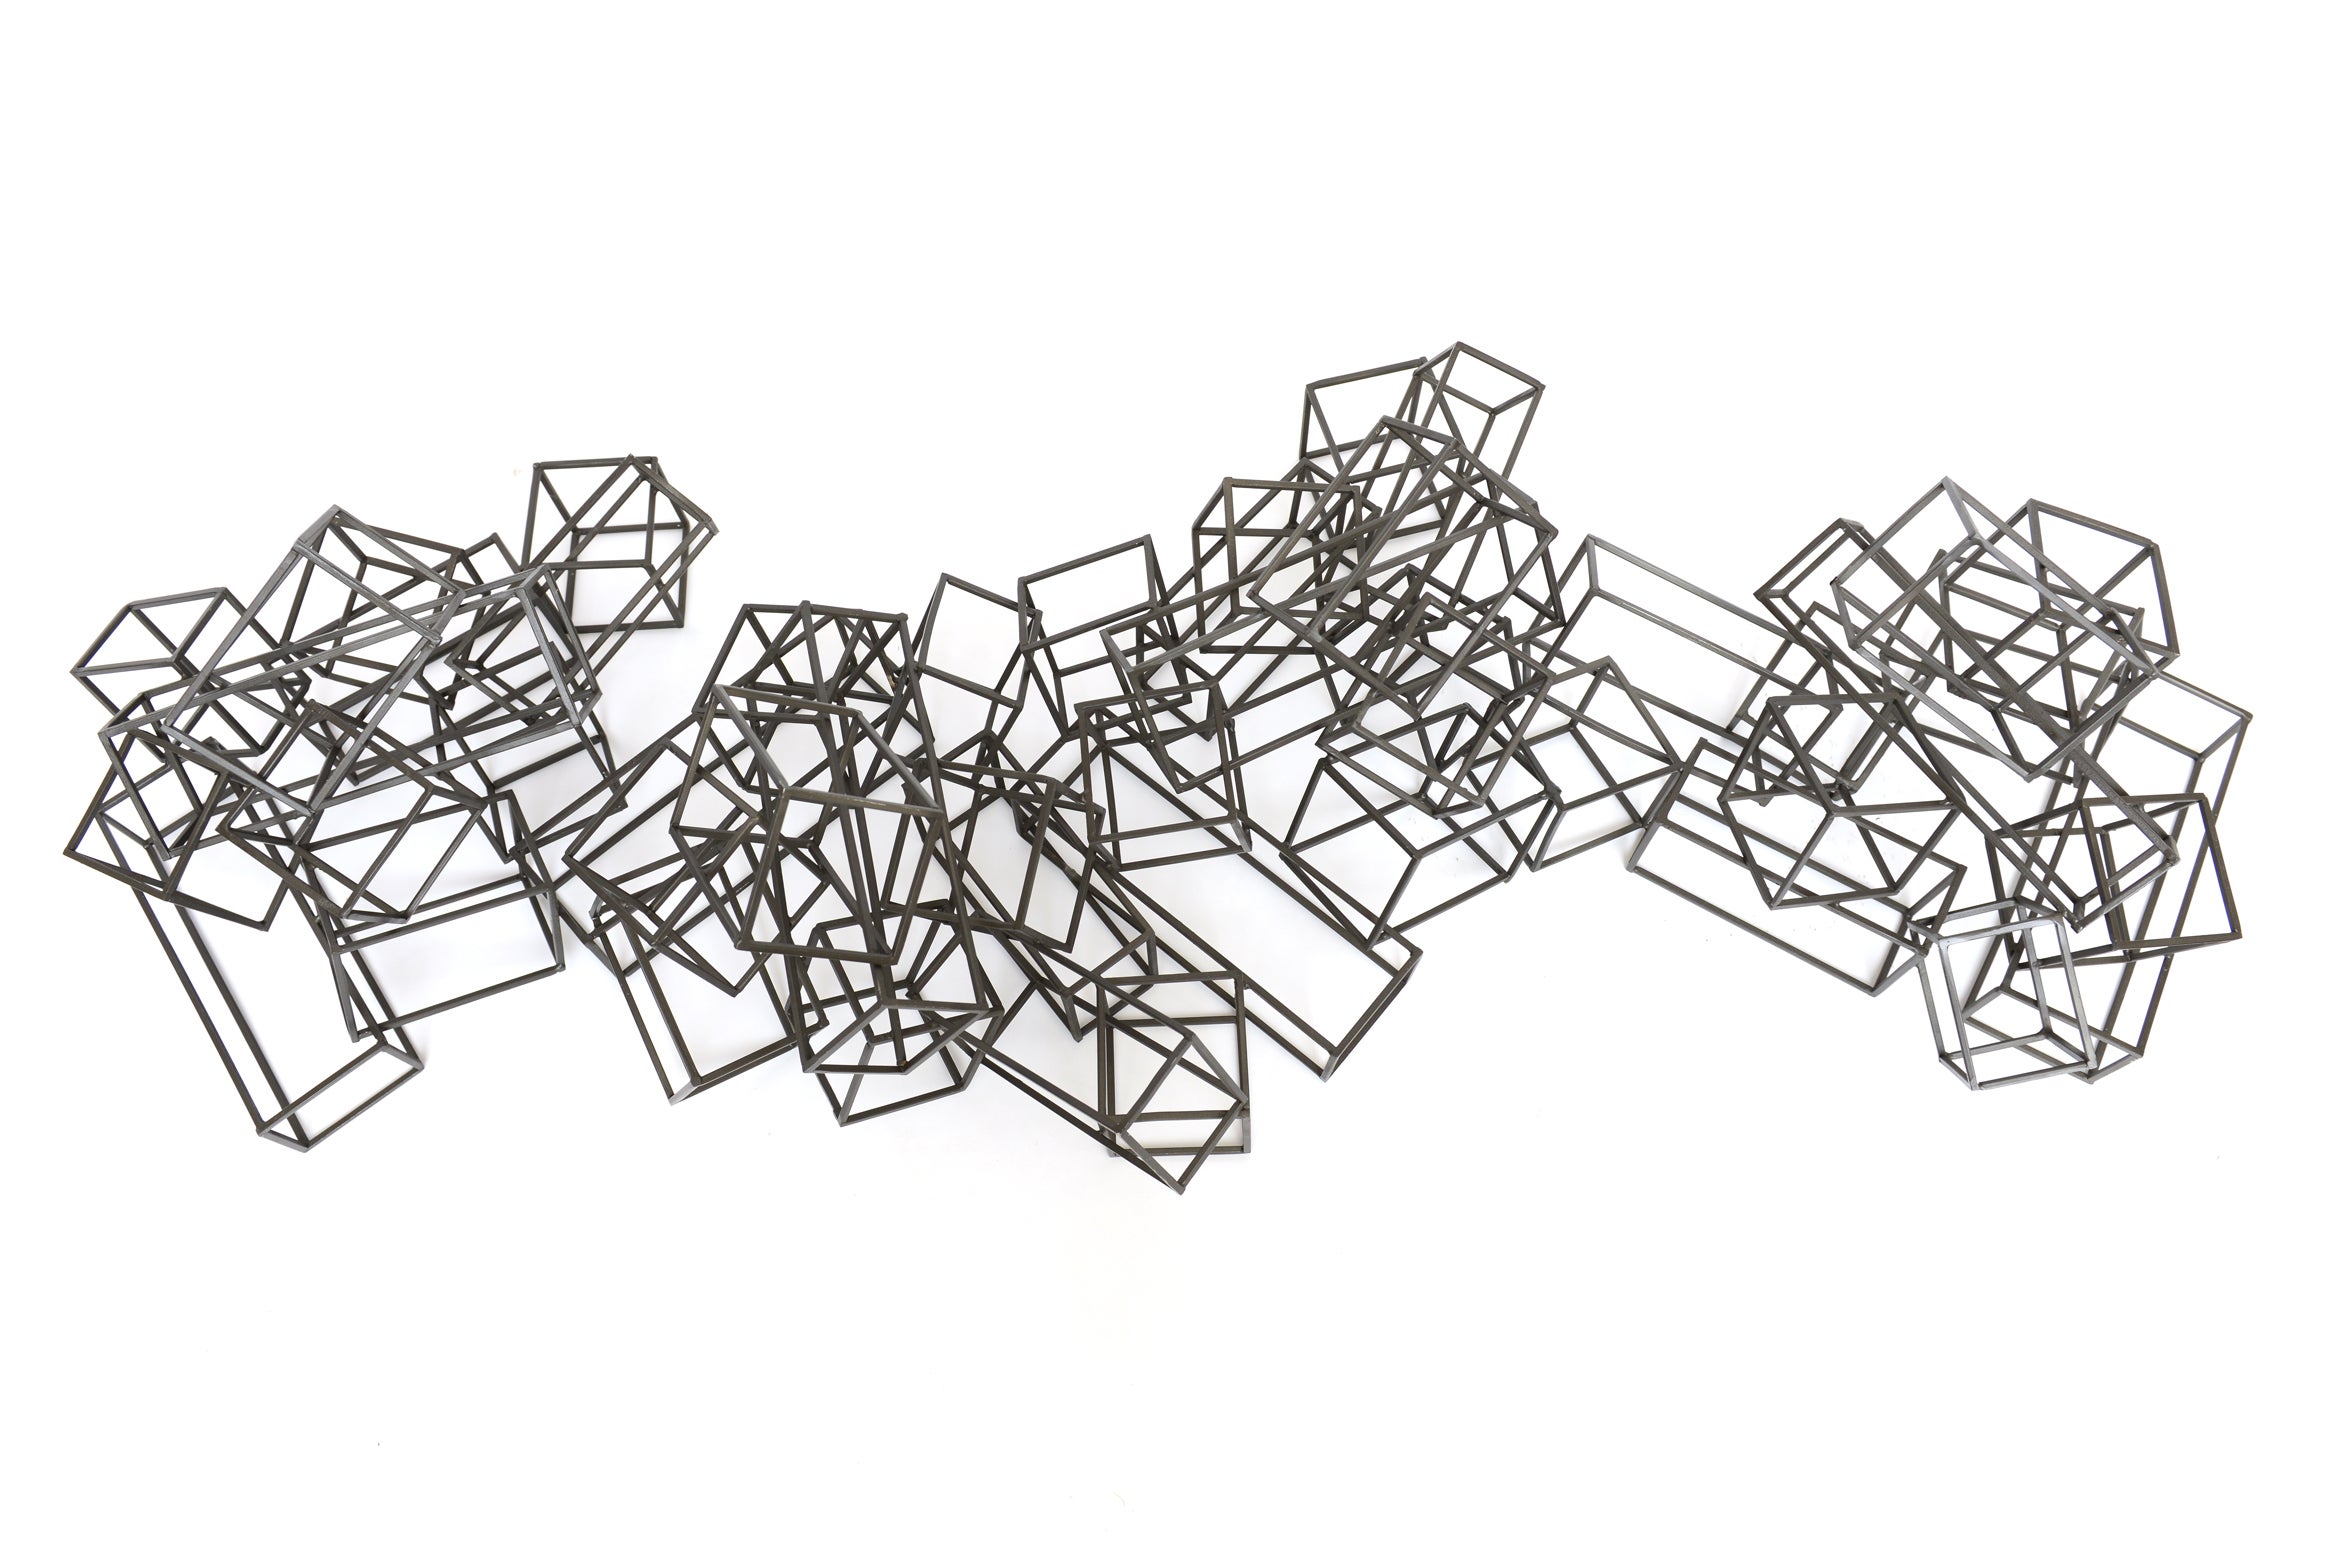 Sol Lewitt Inspired Iron Dimensional Box/Cubed Wall Sculpture